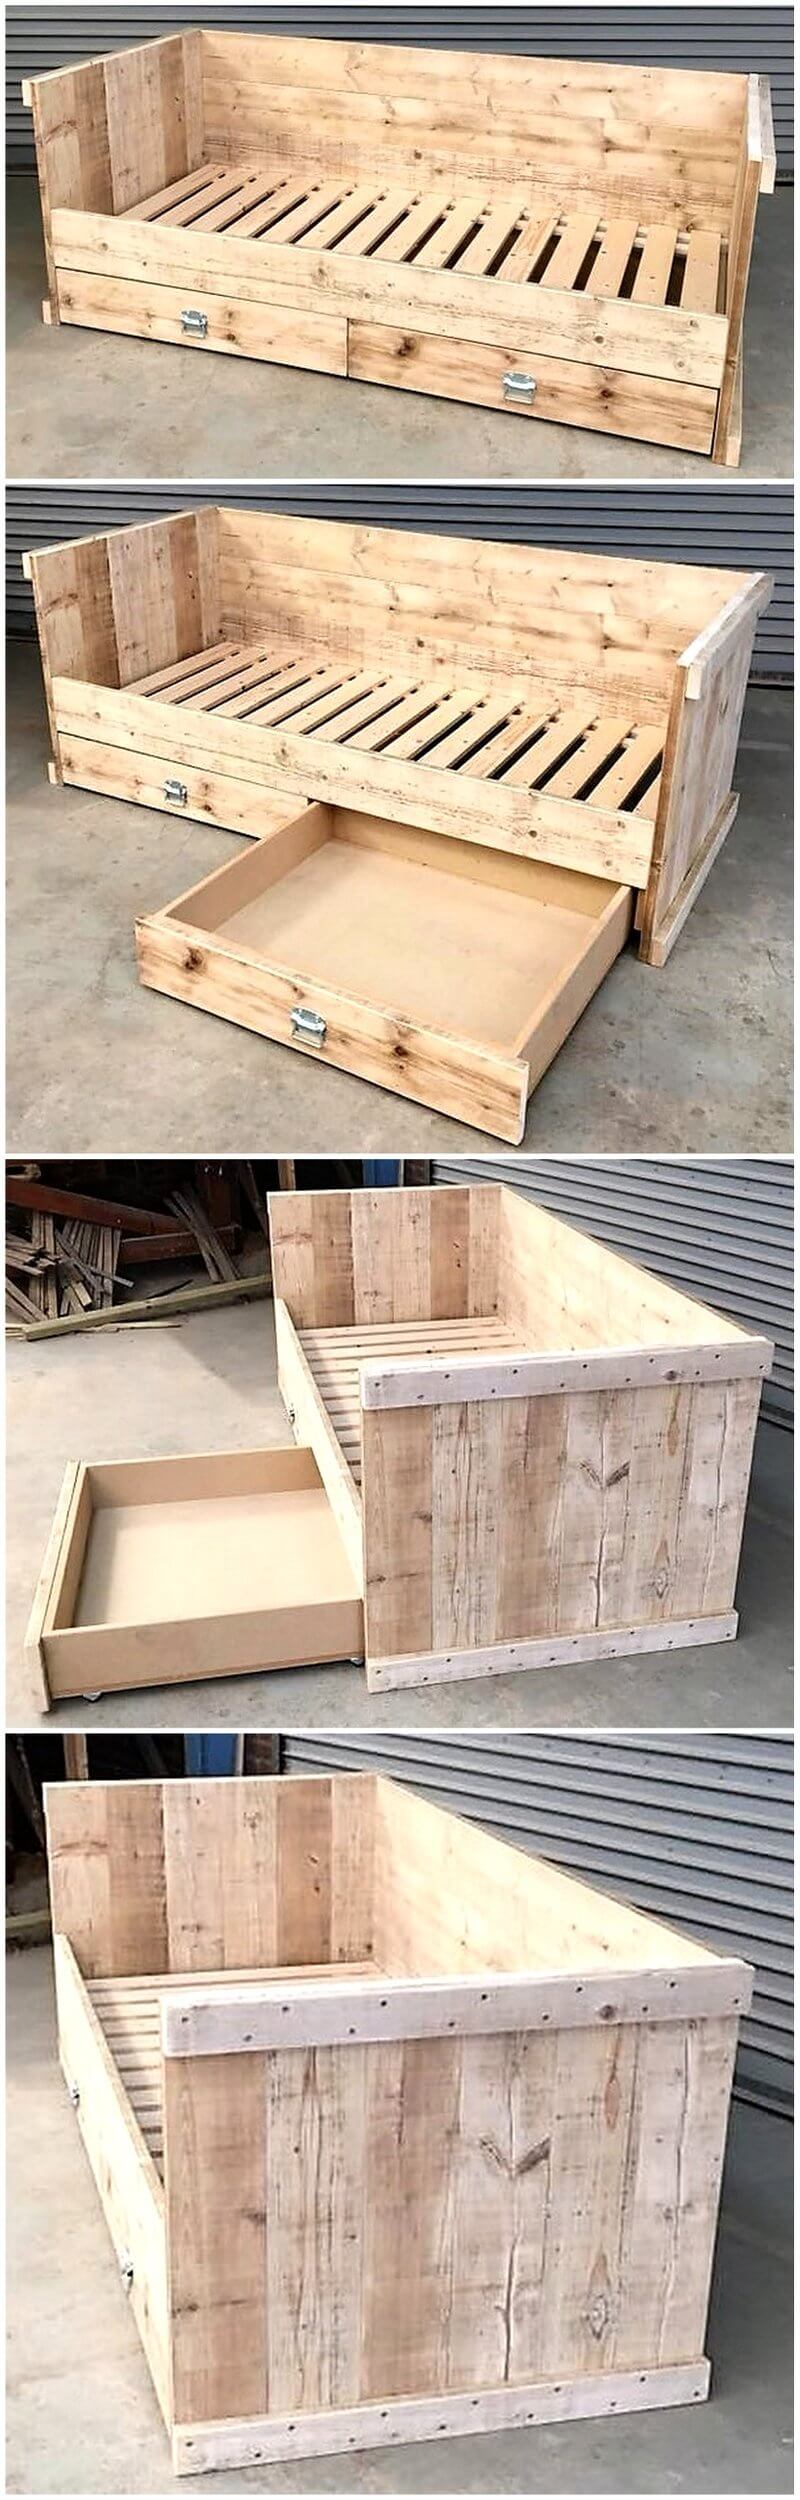 wood pallet bed with storage drawers